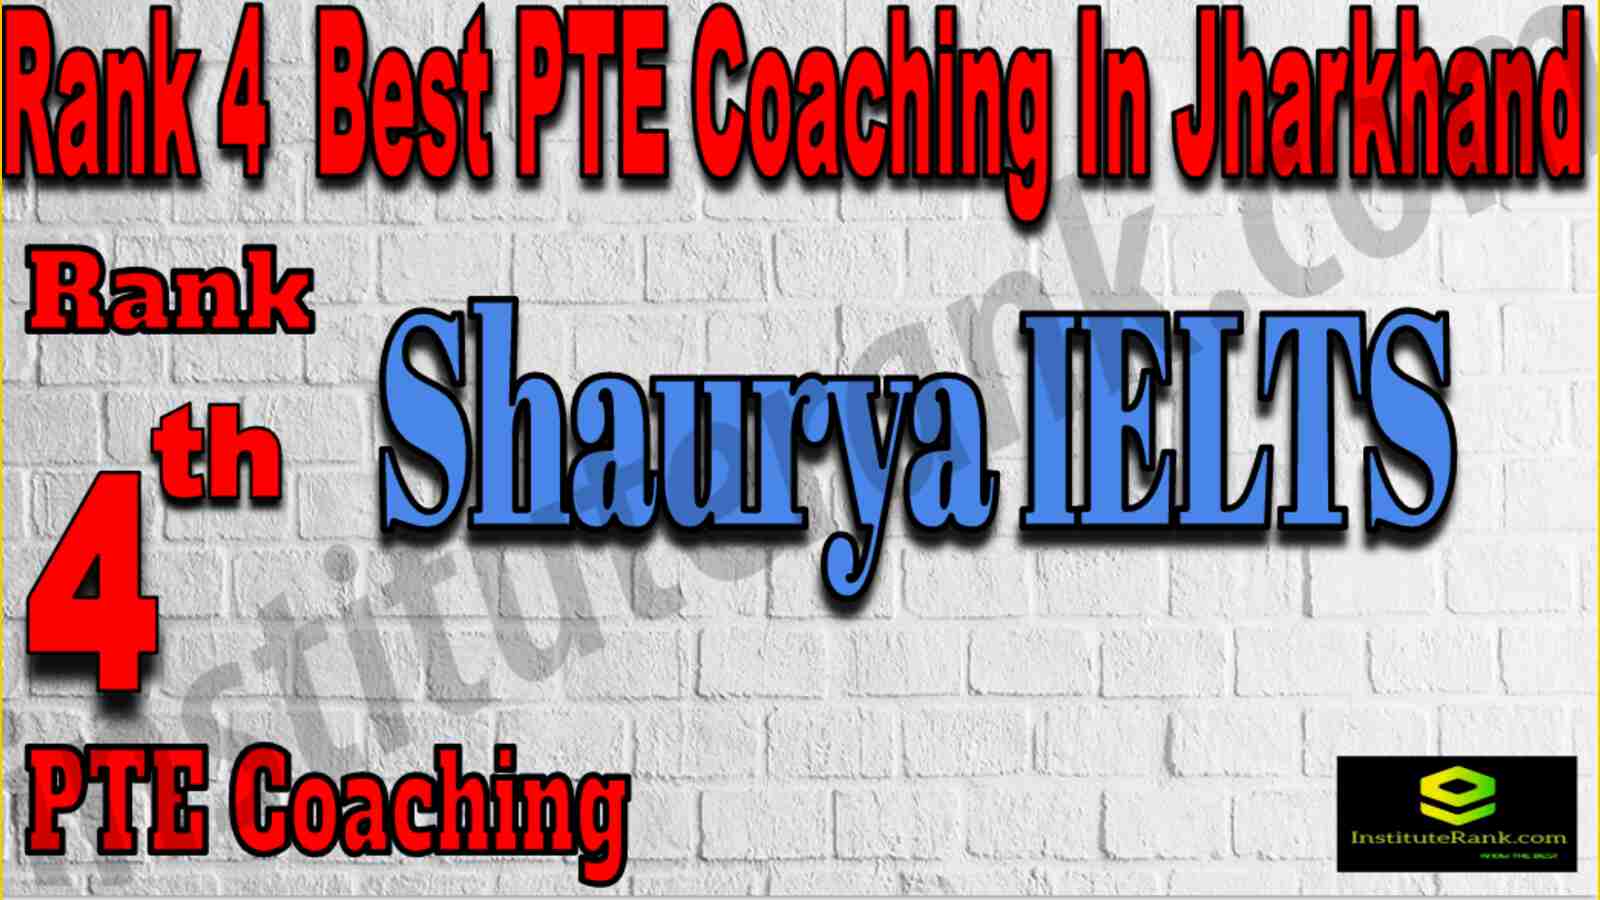 Rank 4 Best PTE Coaching in Jharkhand